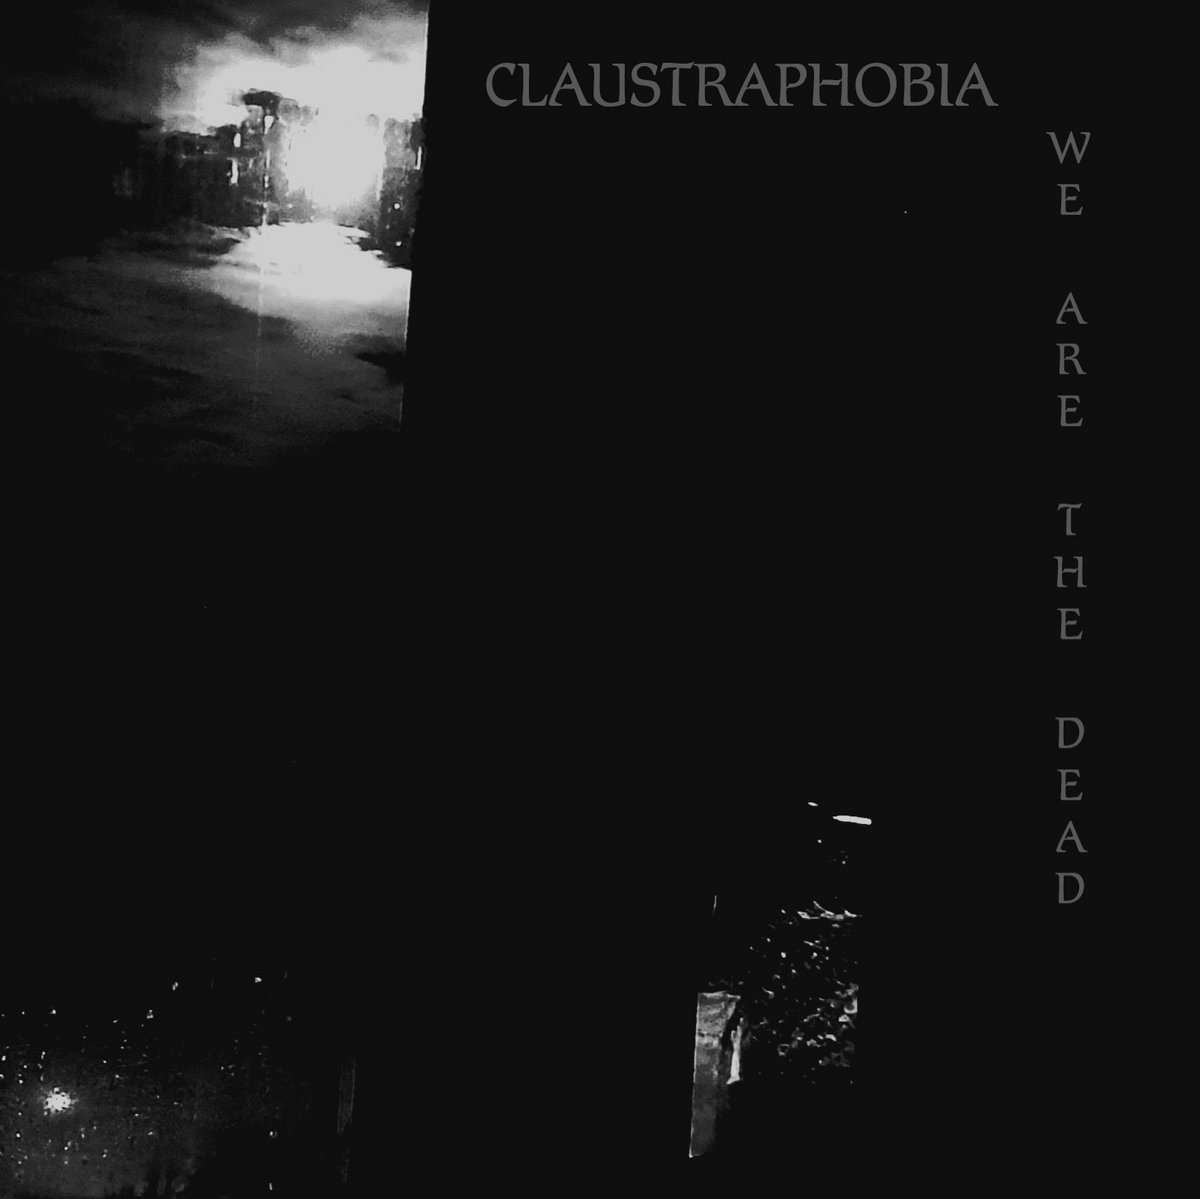 Claustrophabia – We are the deaD (cold wave)